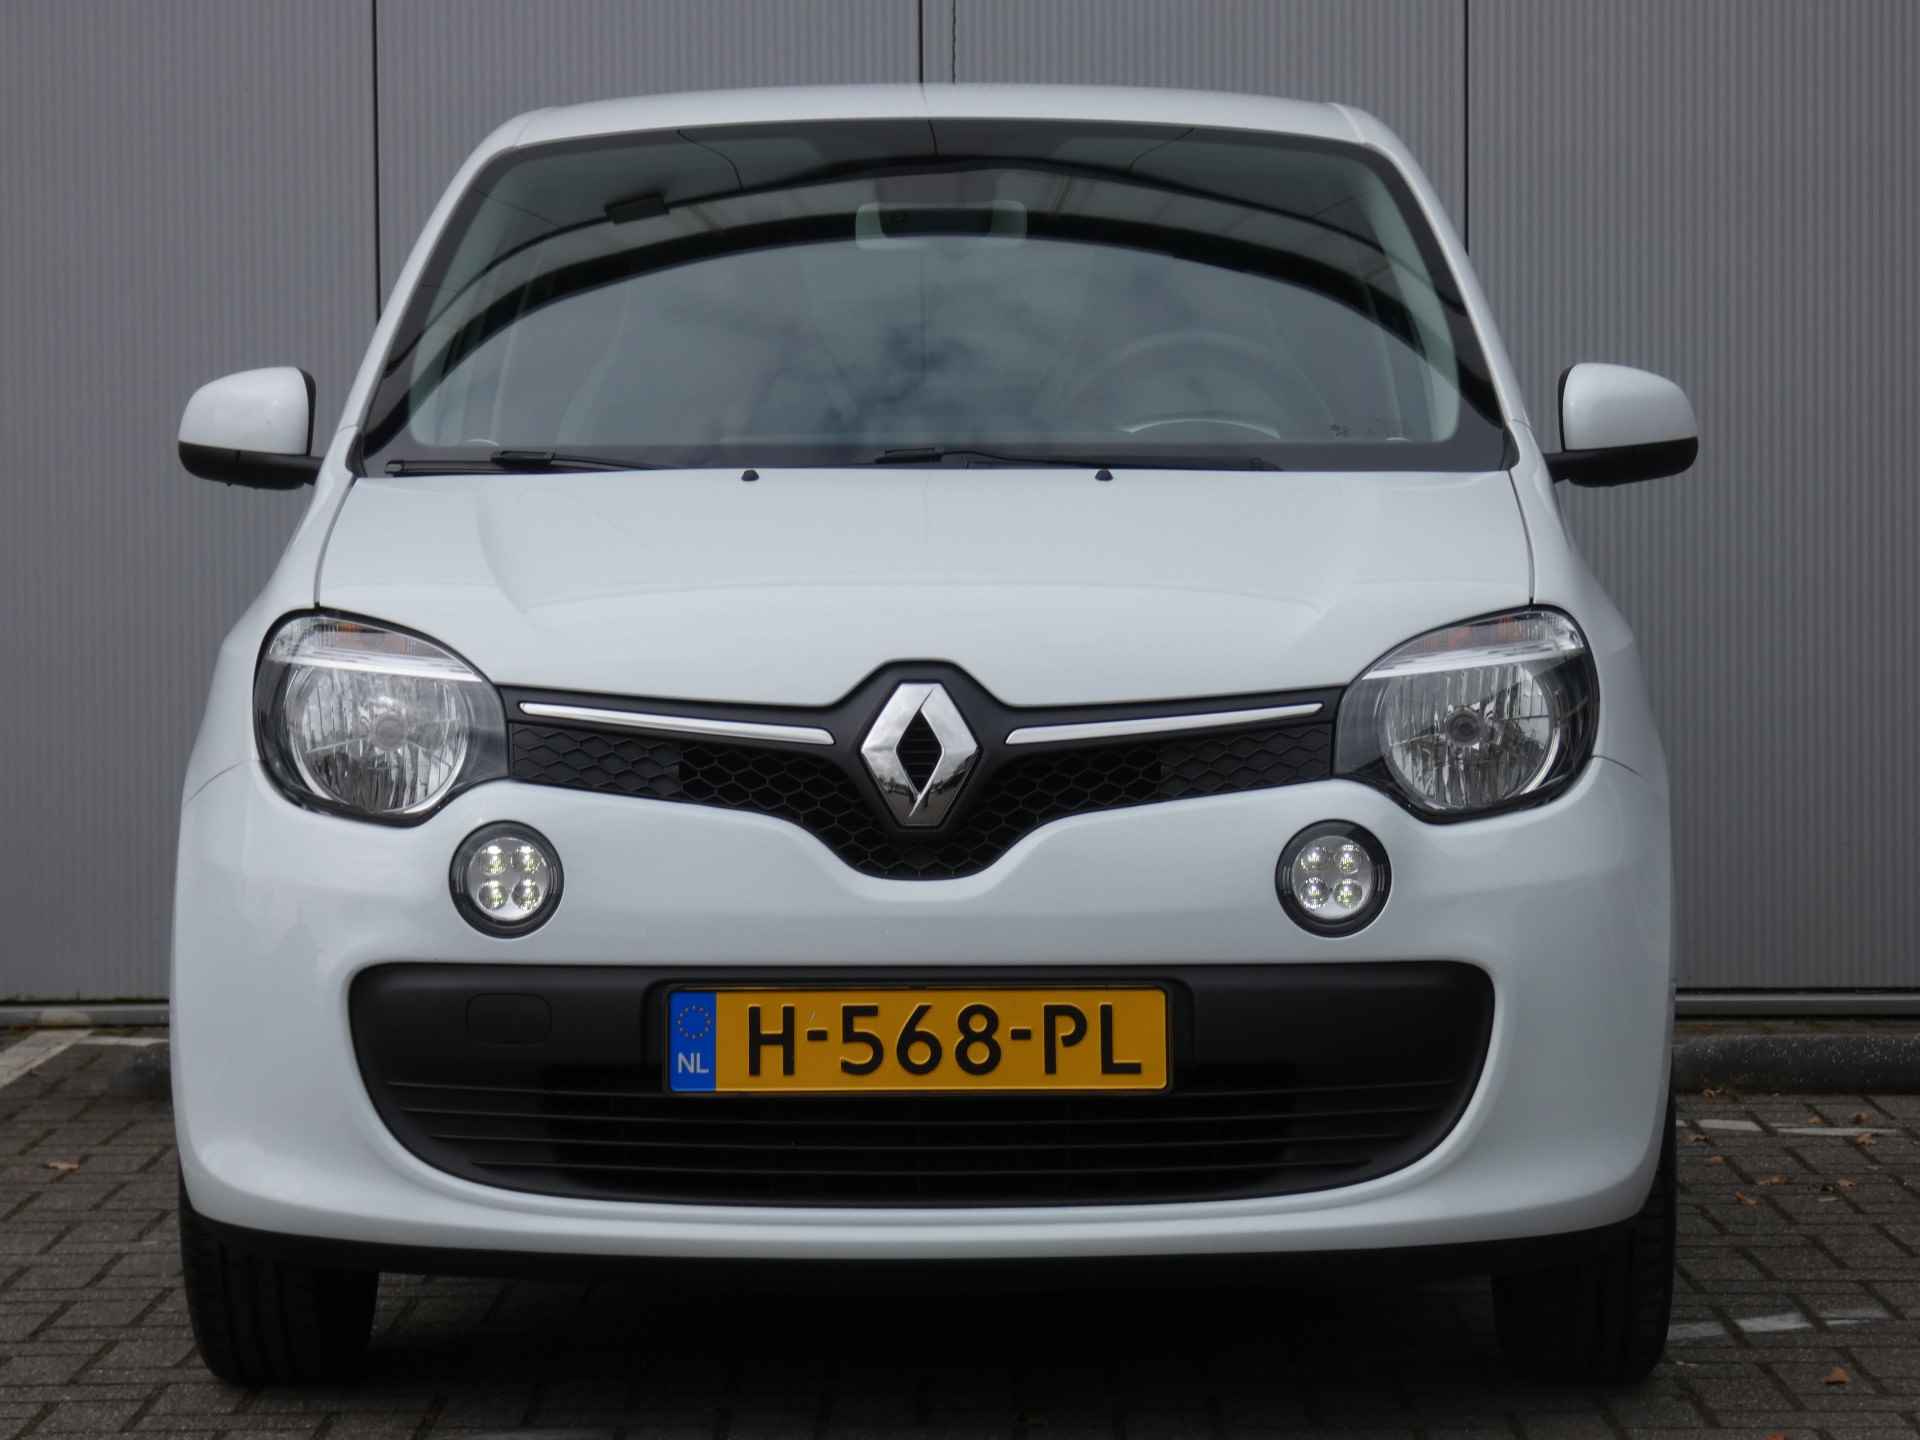 Renault Twingo 0.9 TCe | Cruise Contol | Airco | Bluetooth | Lane assist - 6/57